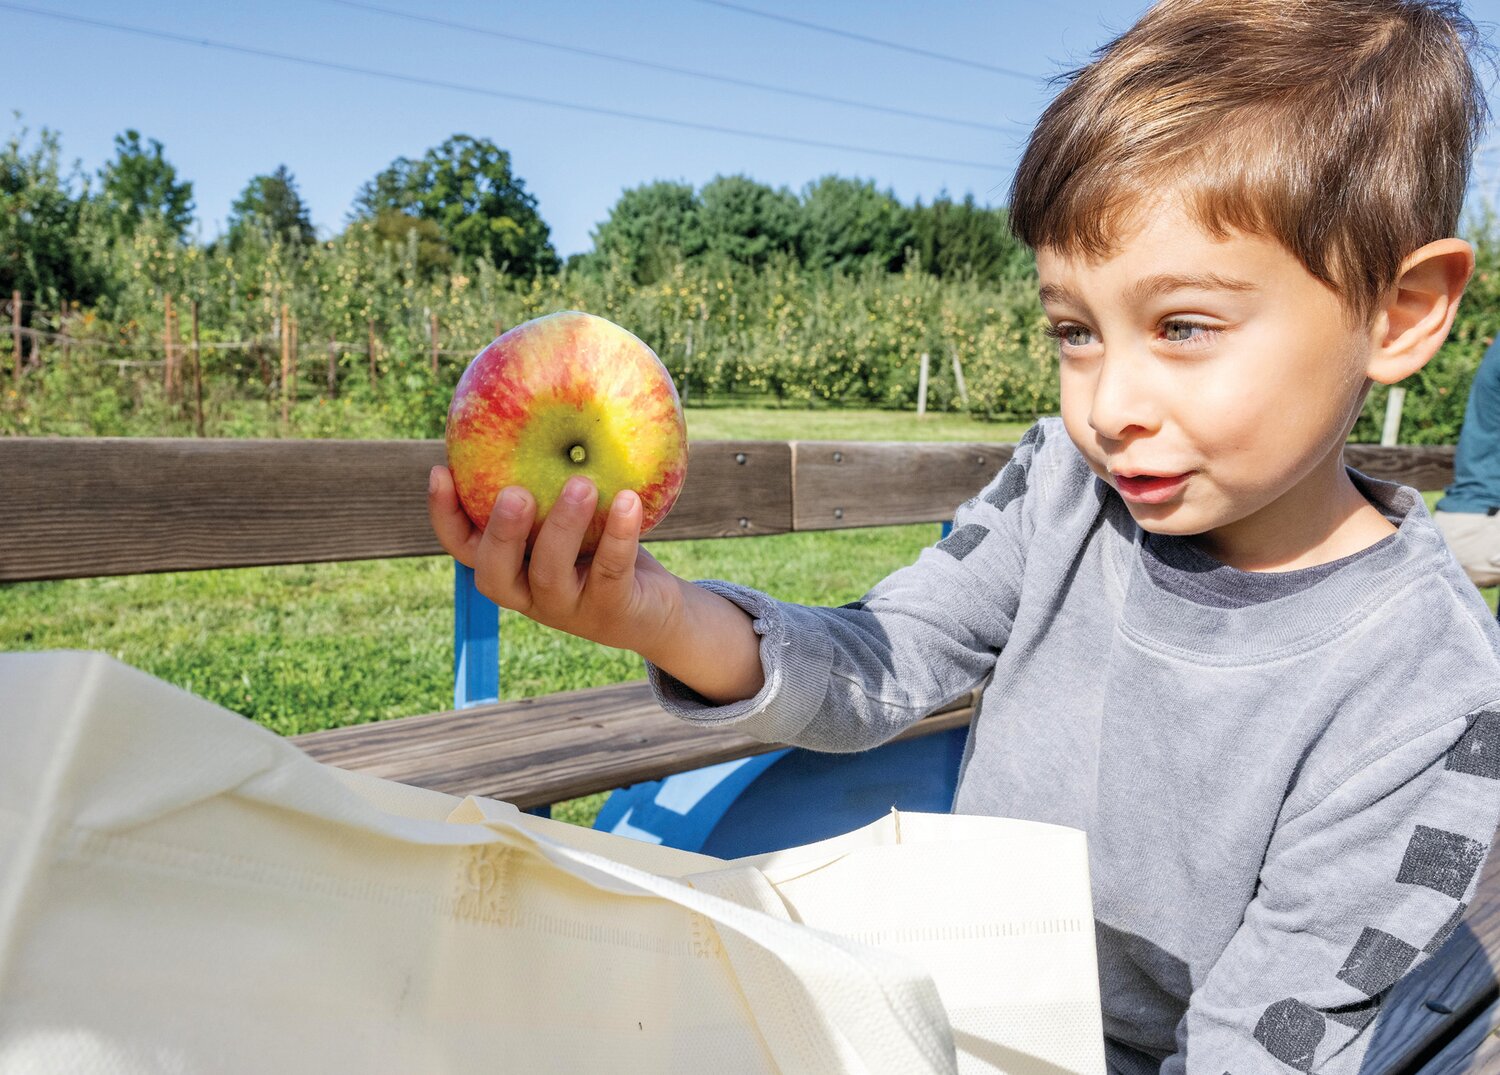 Reign Cogan, 3, eyes up an apple that he just picked off a tree.